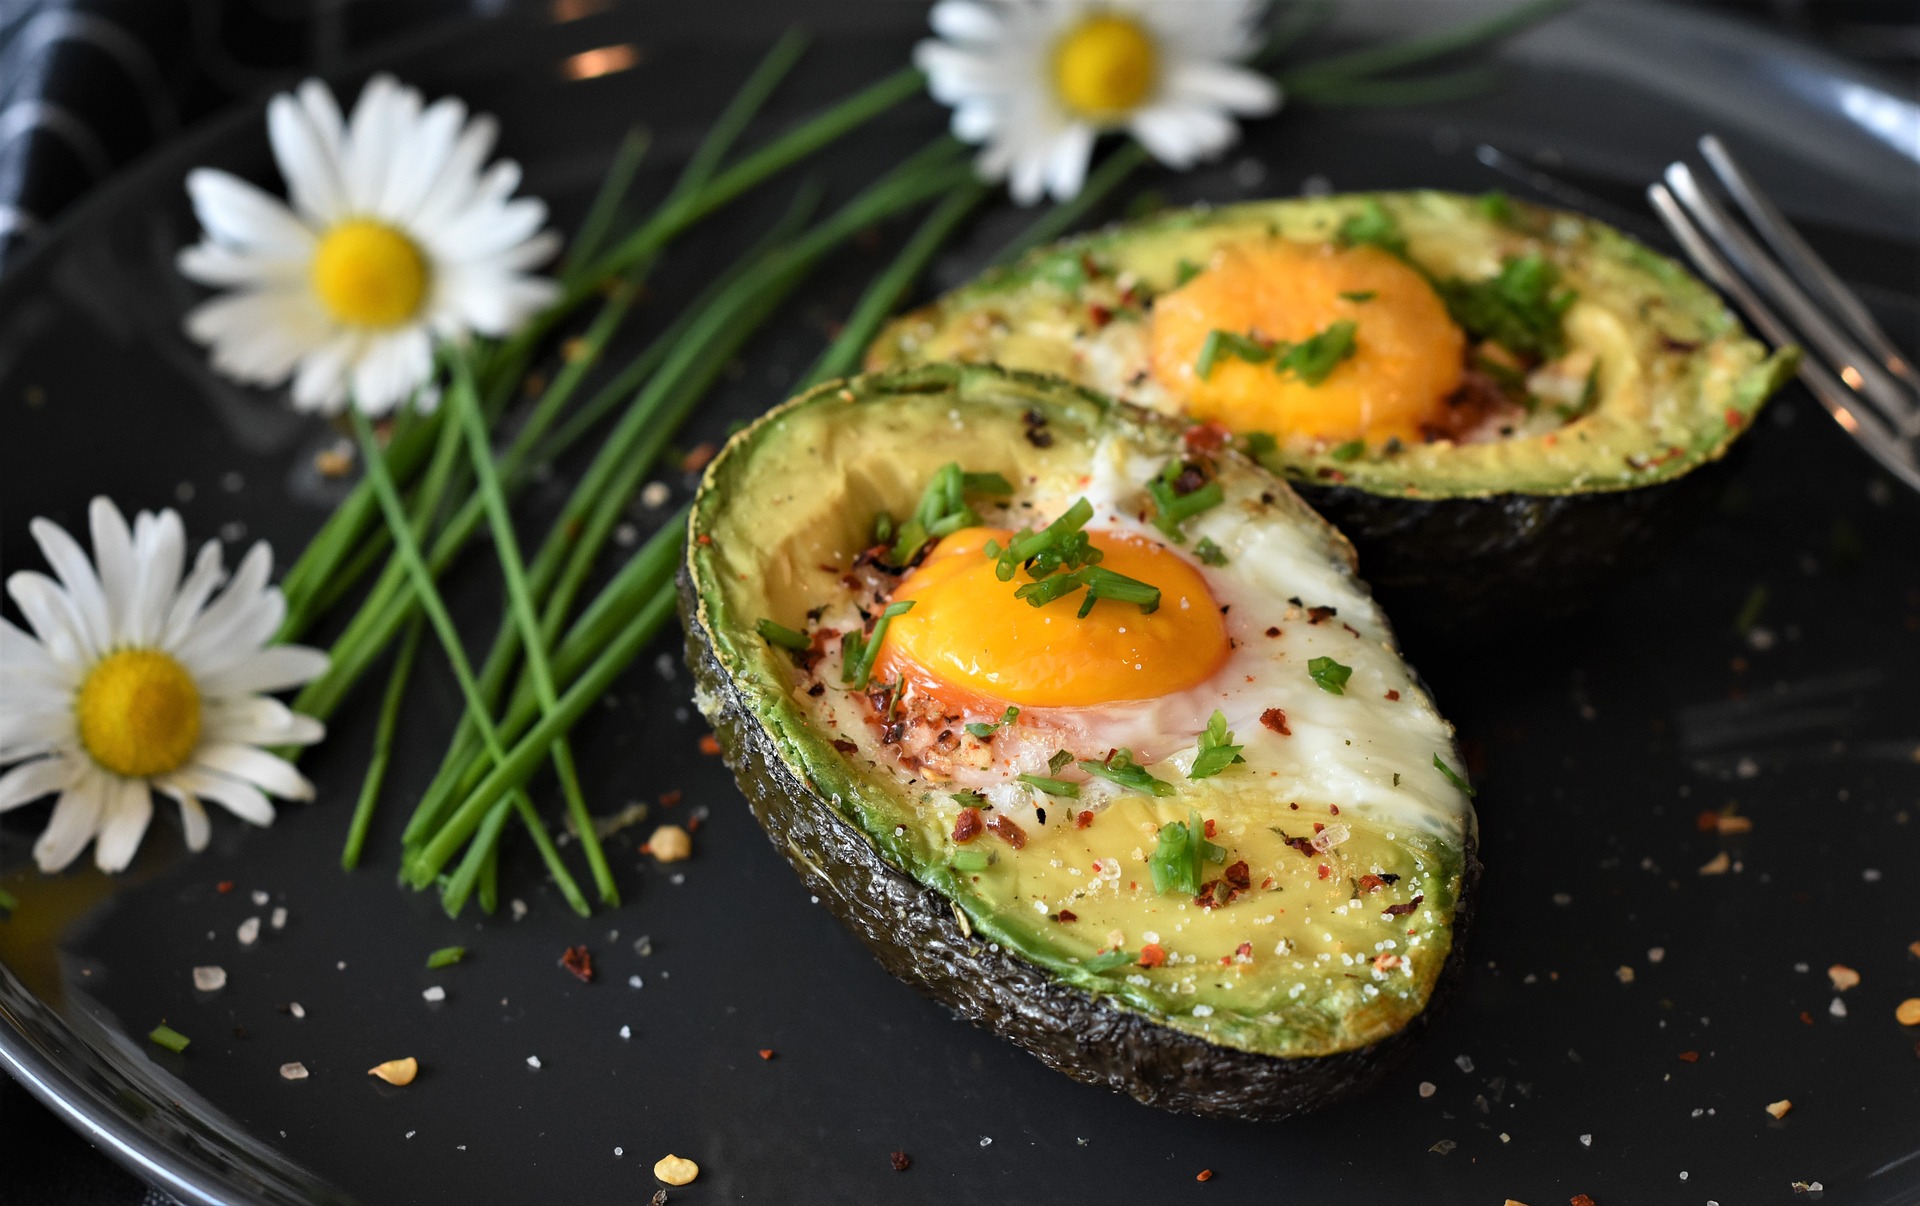 avocado with egg baked in center